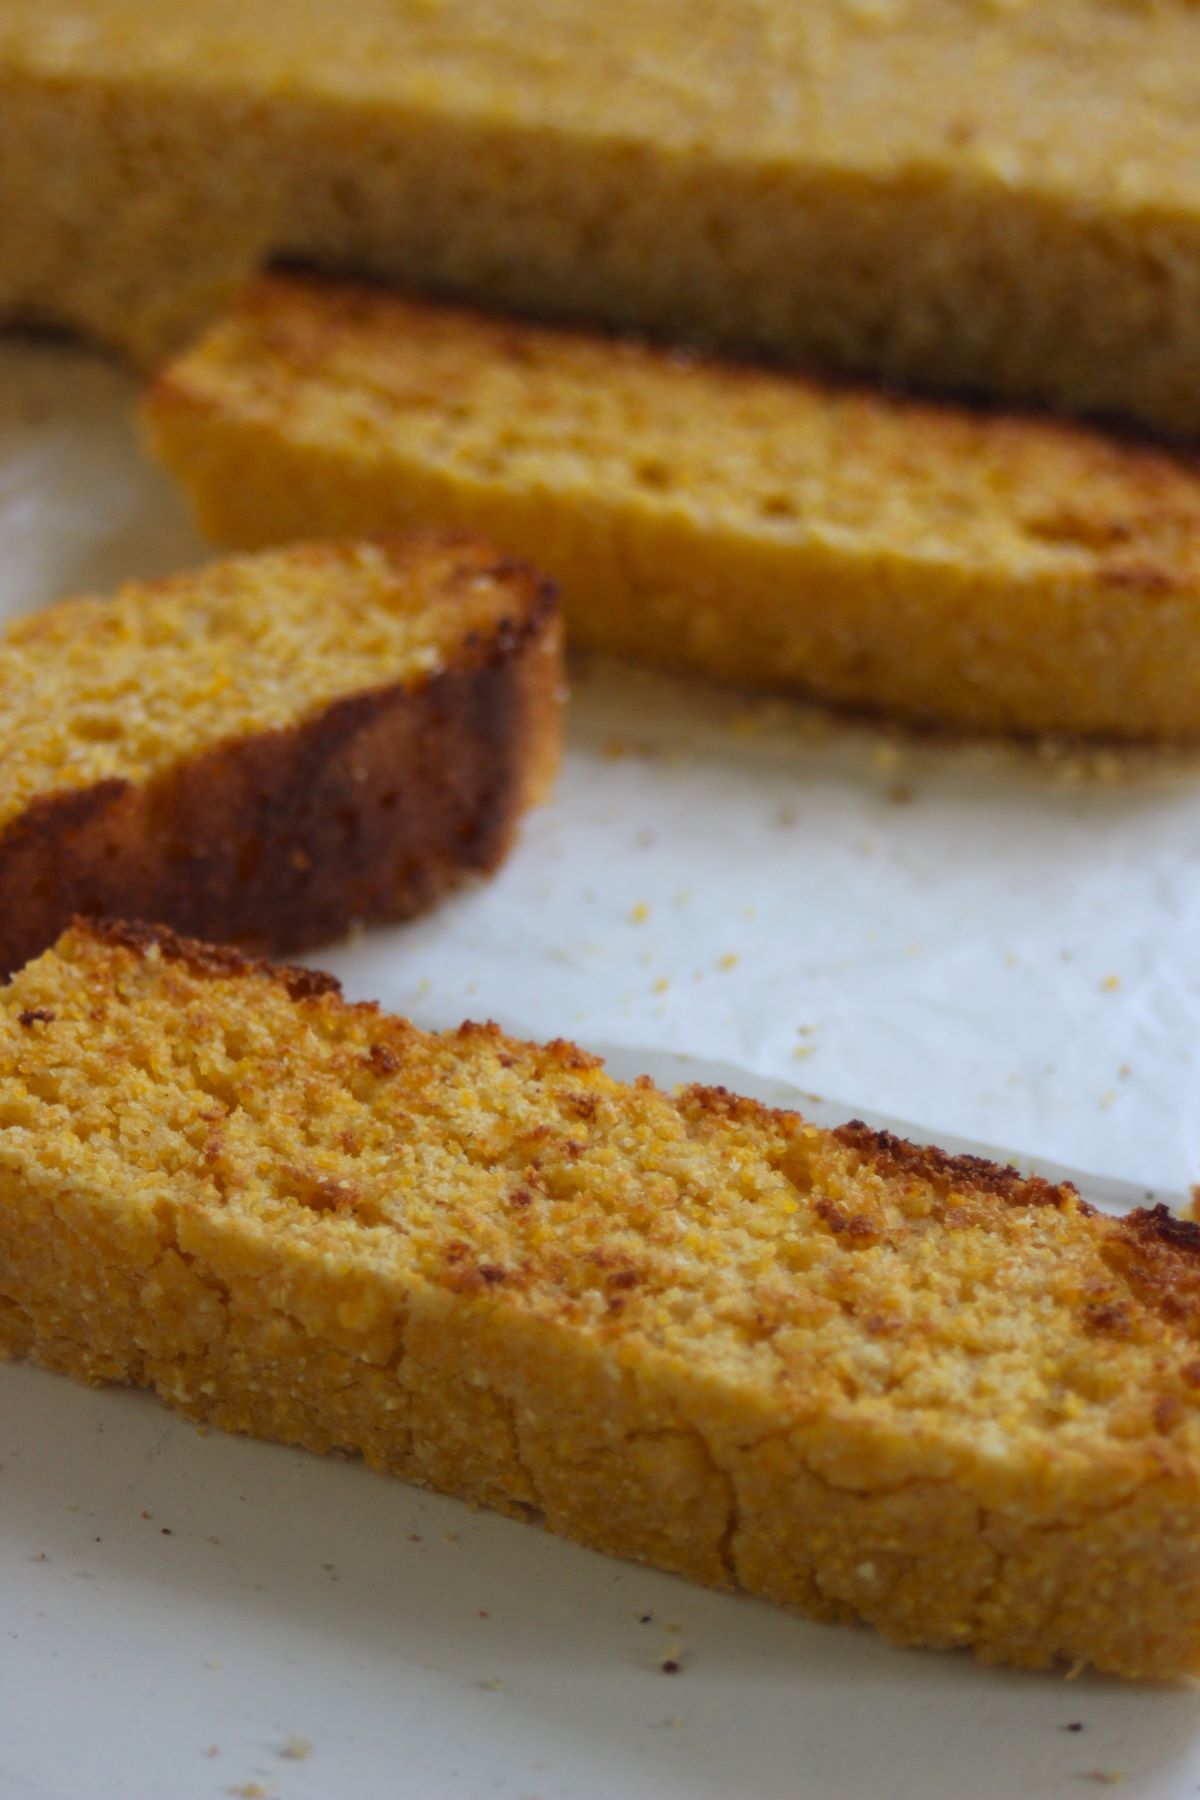 Slices of corn bread on a white surface.